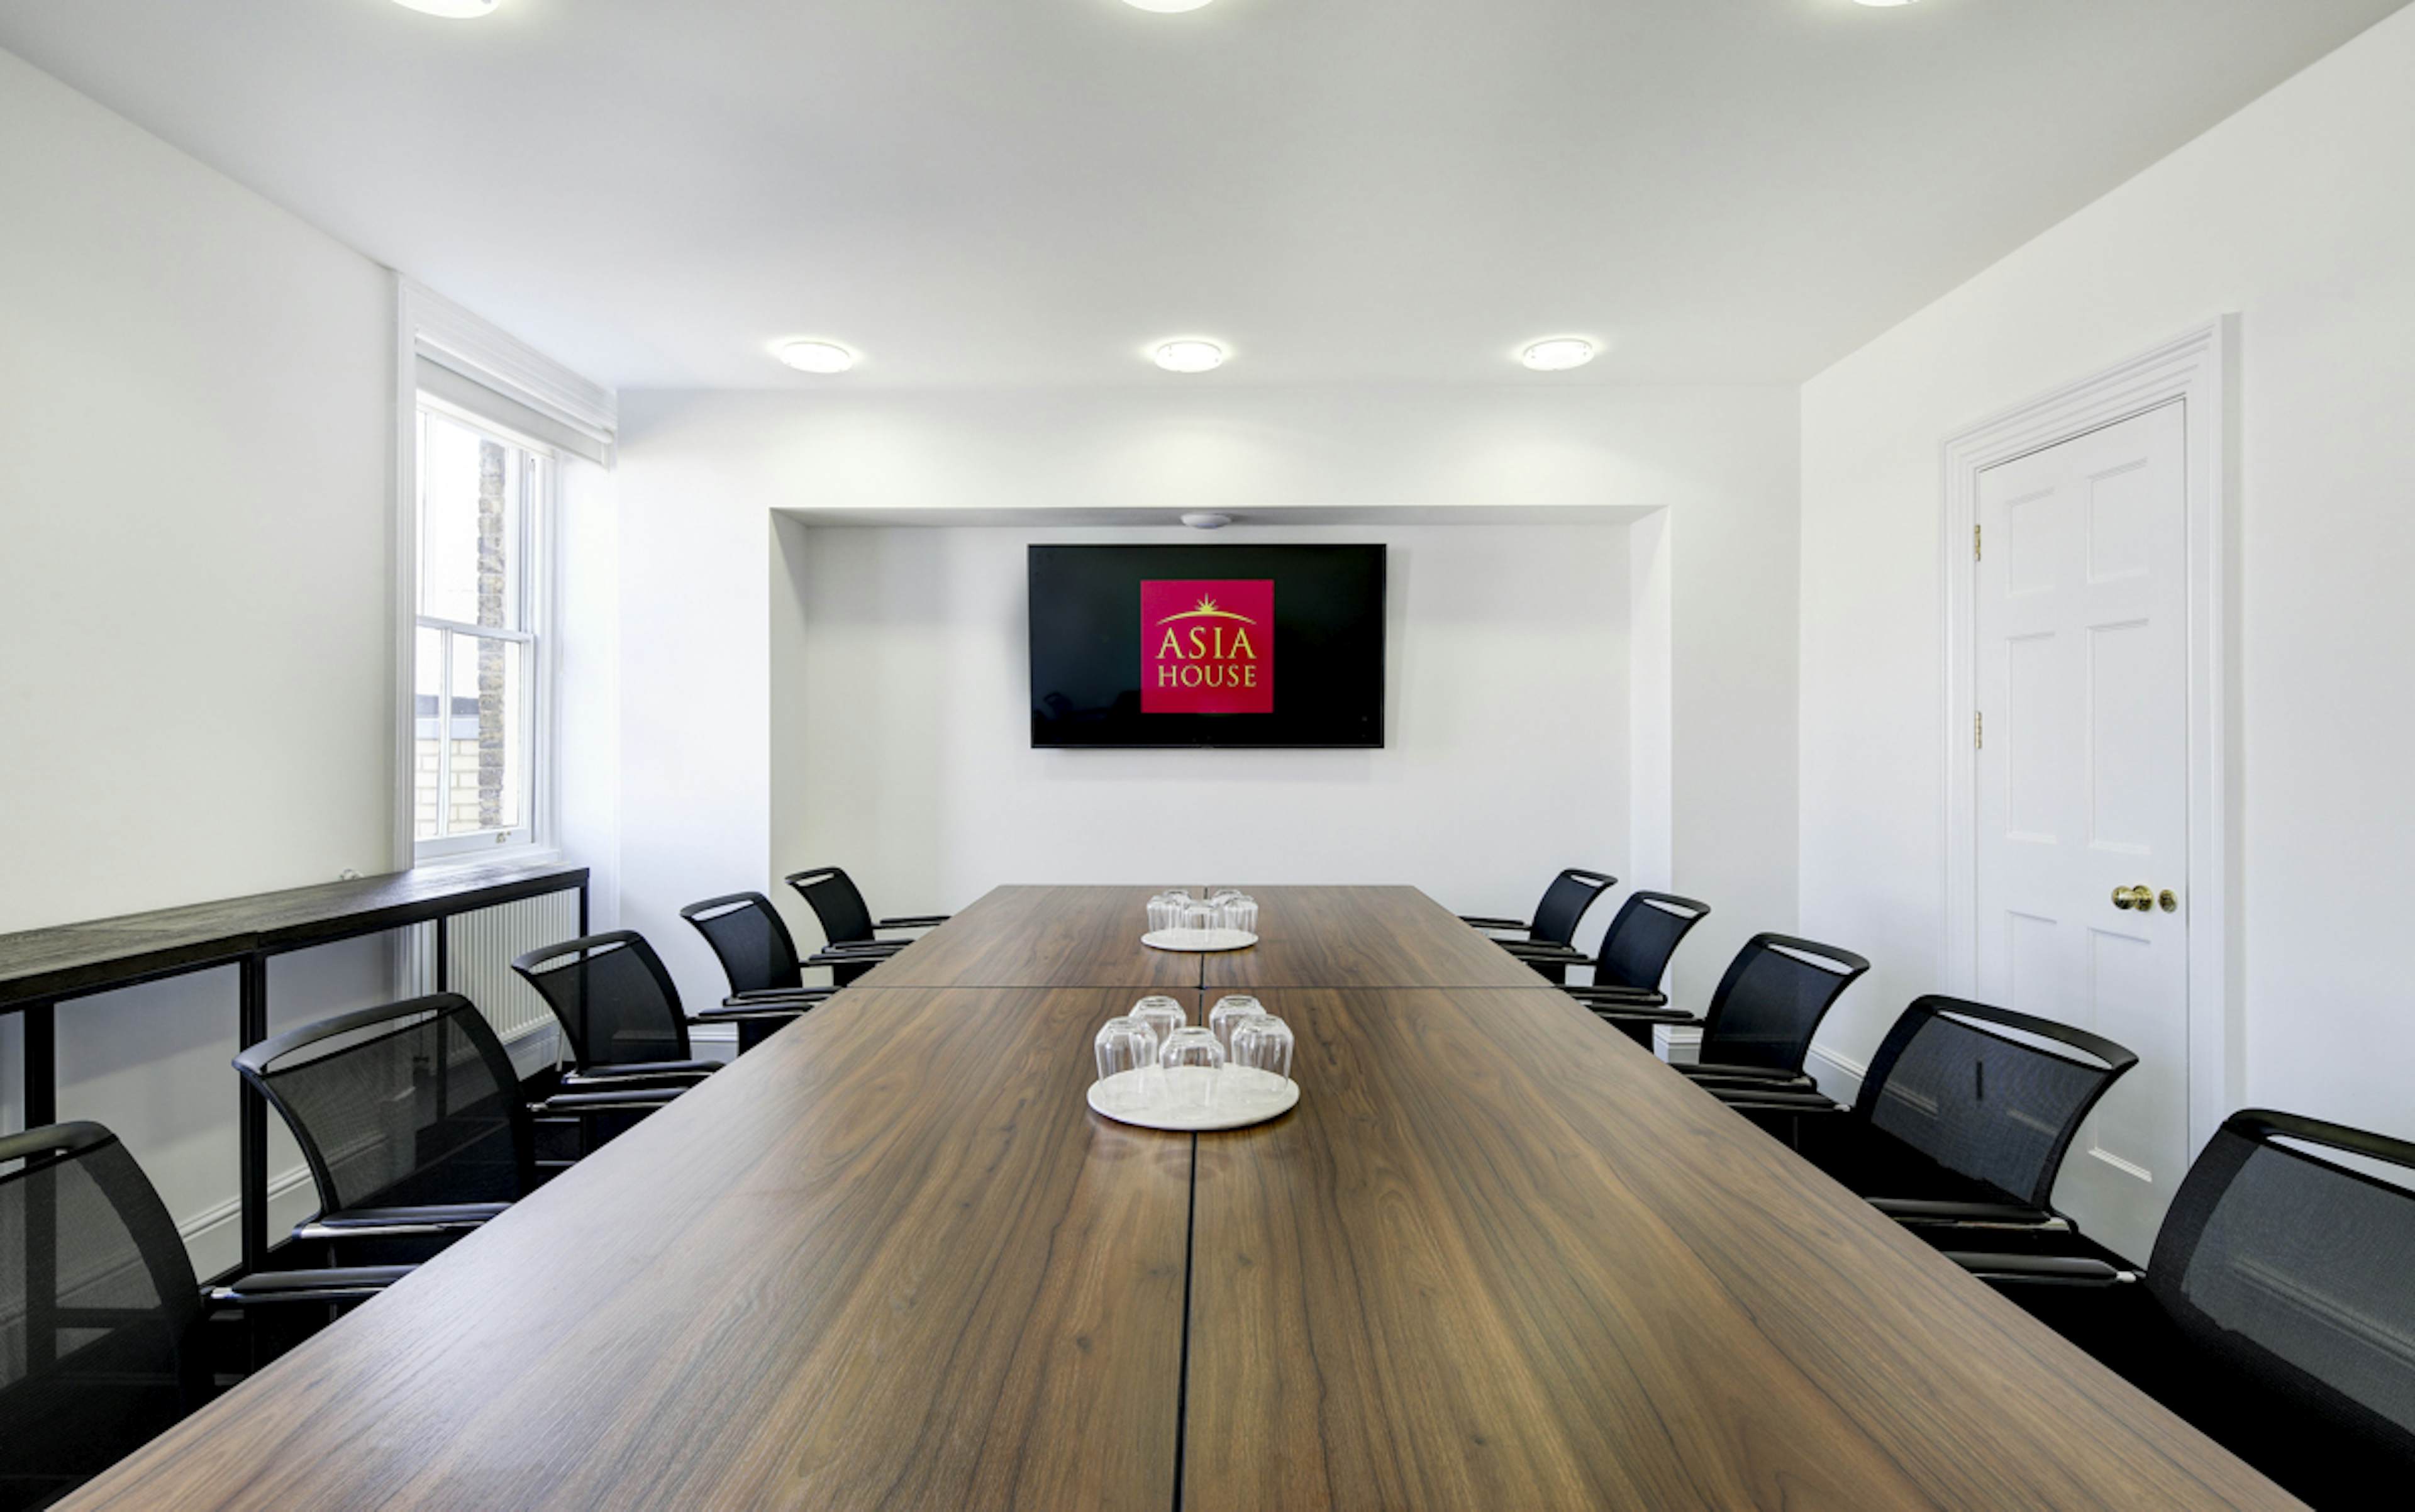 Asia House - Boardroom image 1